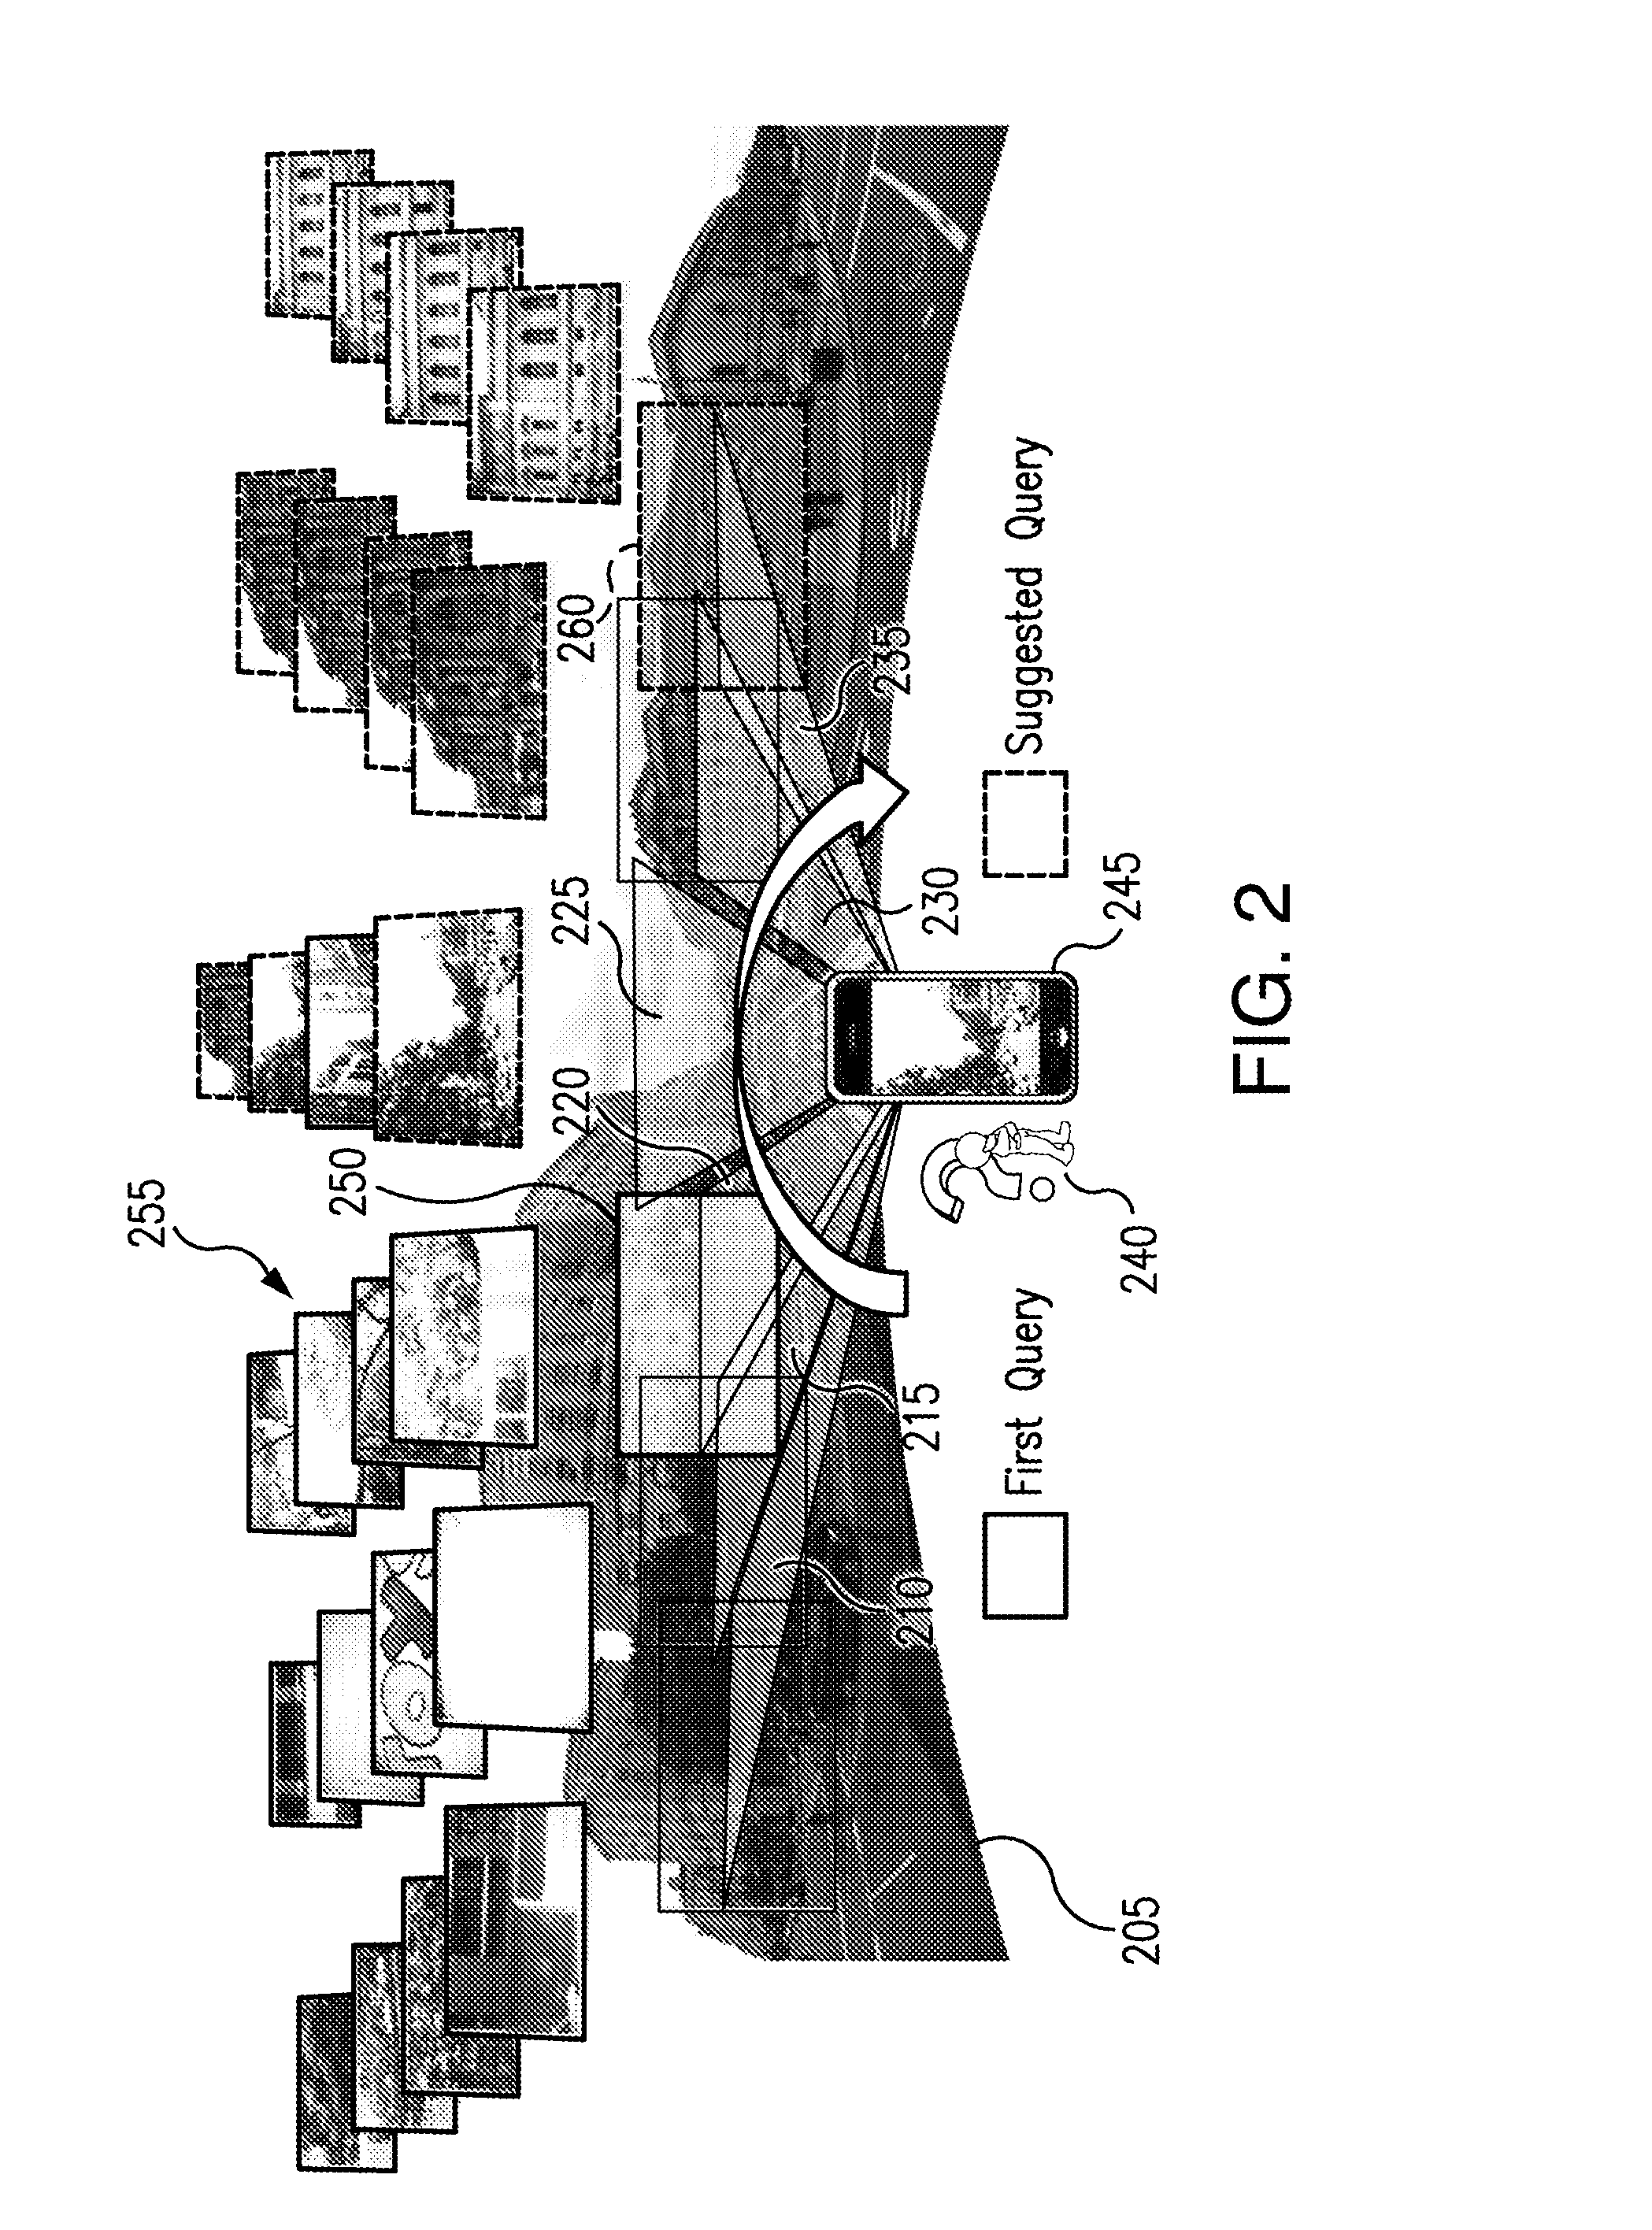 Systems and methods for automatically determining an improved view for a visual query in a mobile search